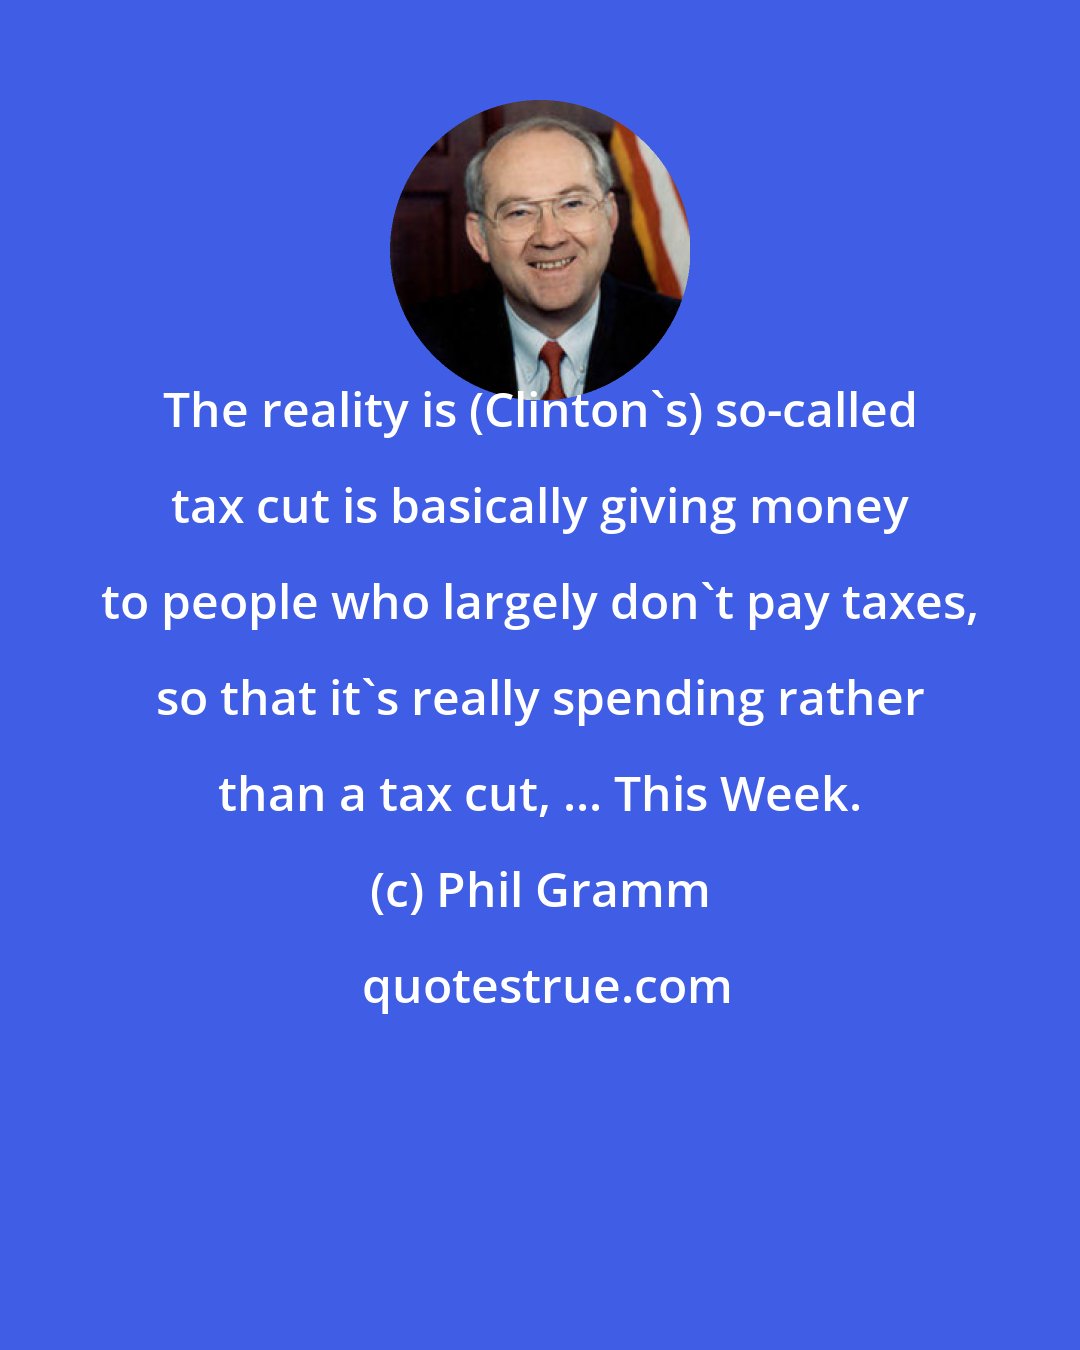 Phil Gramm: The reality is (Clinton's) so-called tax cut is basically giving money to people who largely don't pay taxes, so that it's really spending rather than a tax cut, ... This Week.